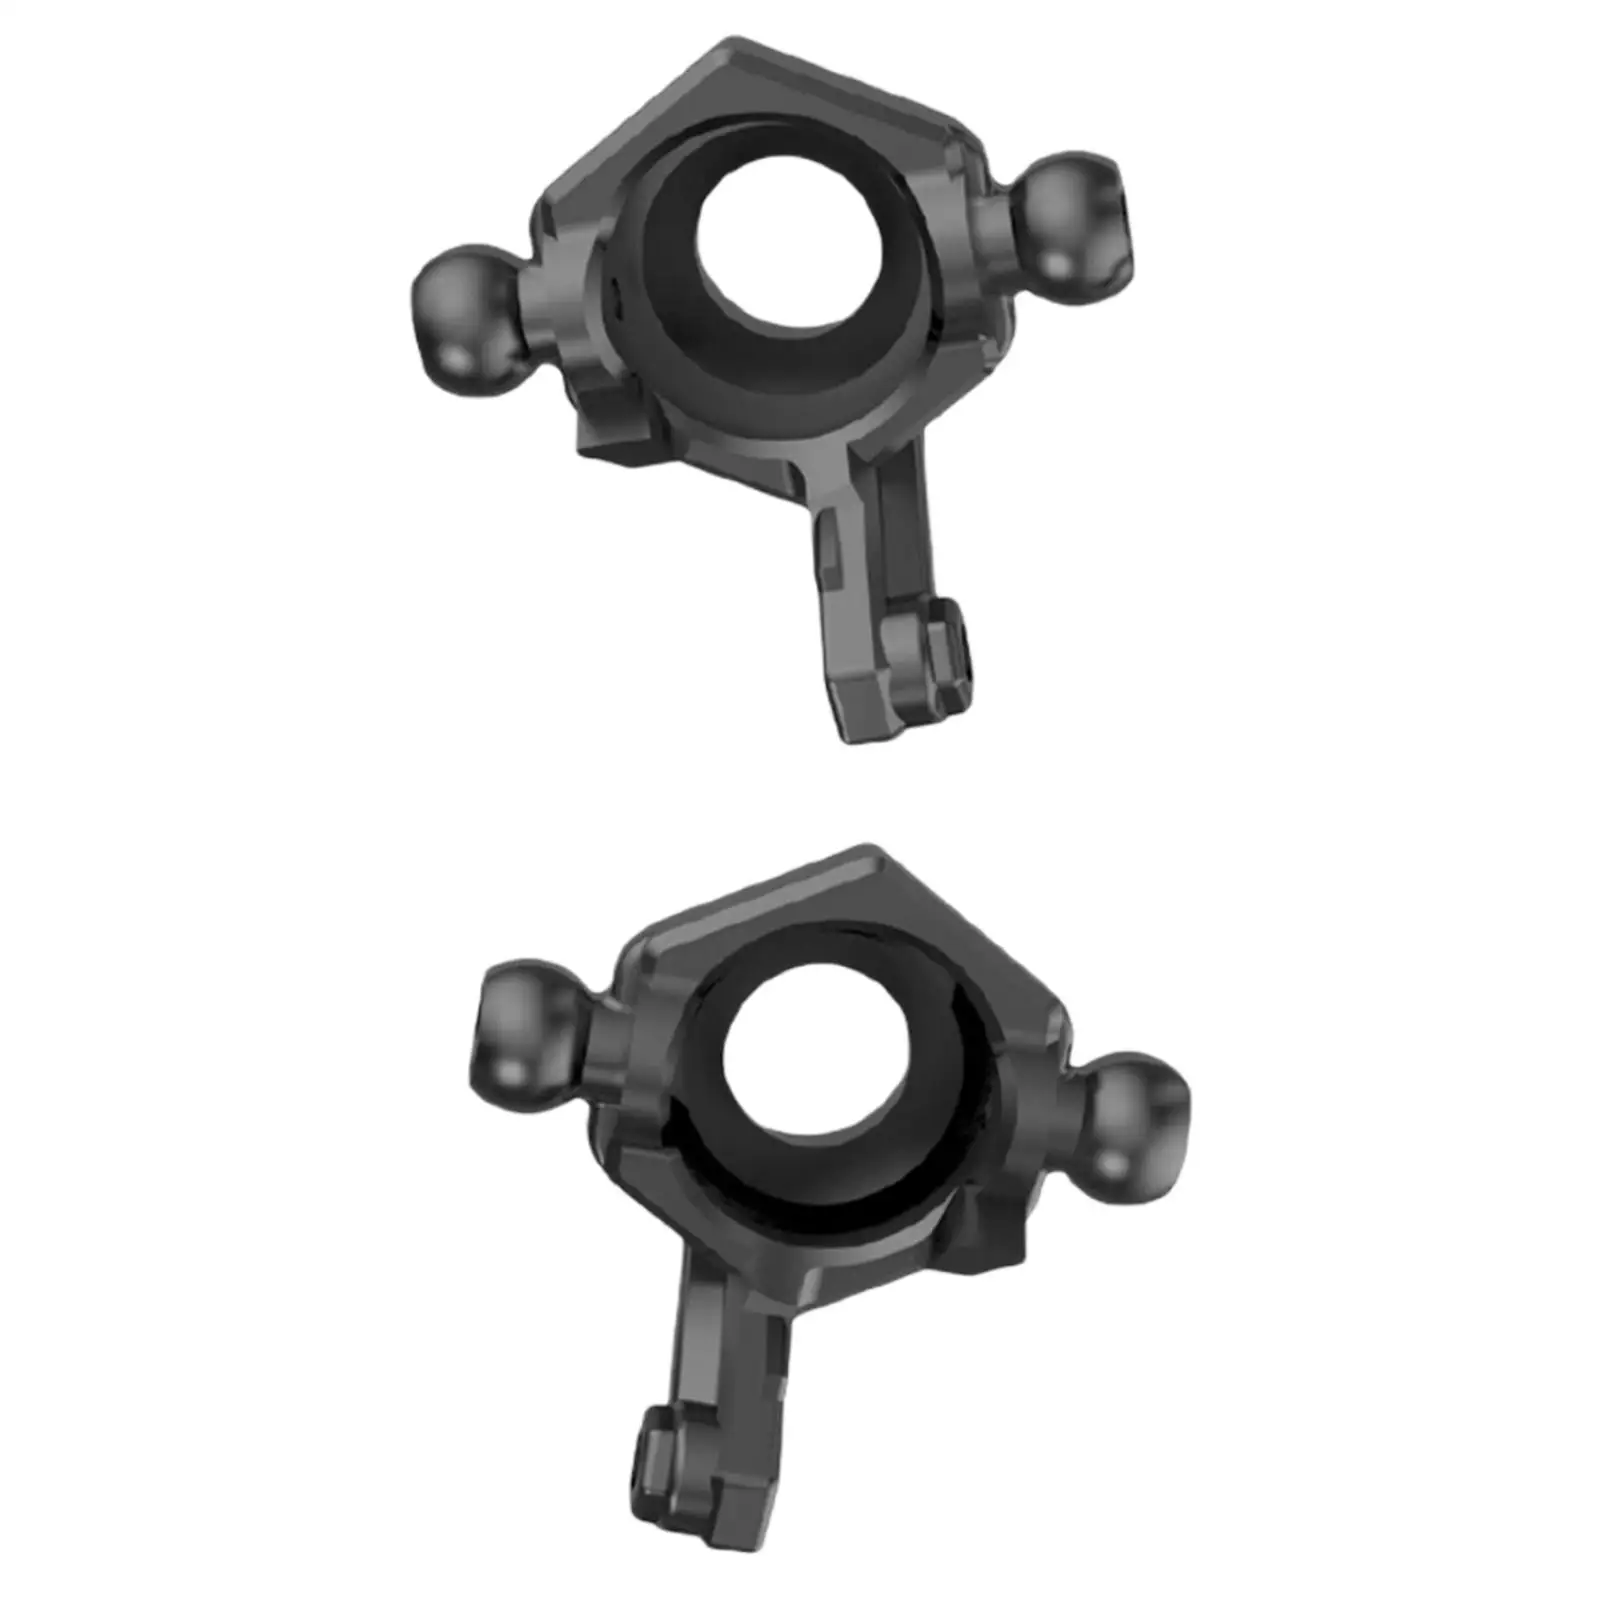 1 Pair Plastic RC Car Front Hub Carrier for SG1603 SG-1603 SG-1604 1/16 2.4G Remote Control Car Truck Hobby Model Vehicle